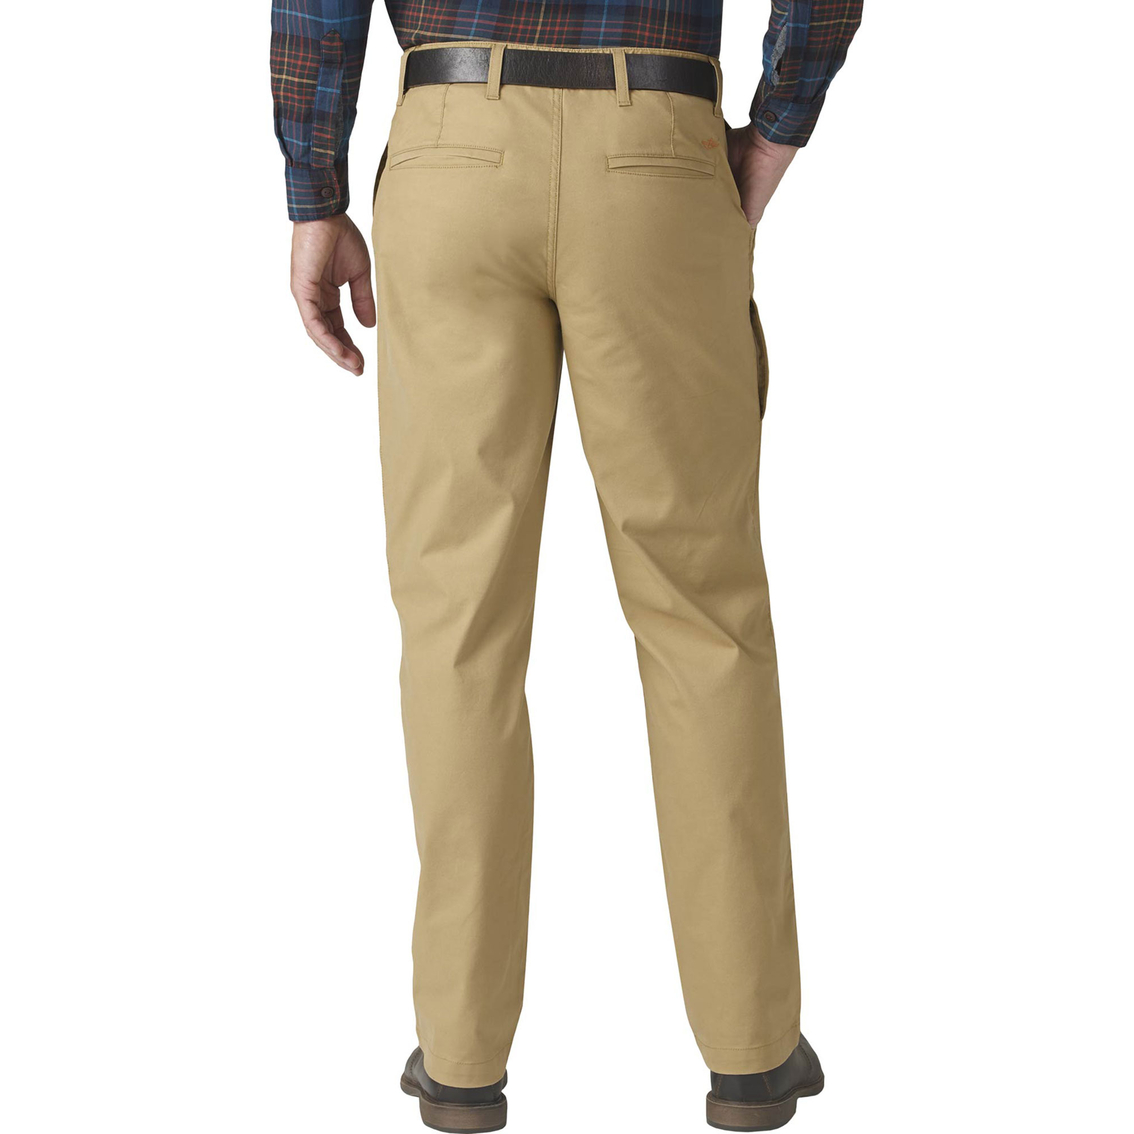 Dockers Big & Tall Pacific On The Go Flat Front Pants - Image 3 of 3